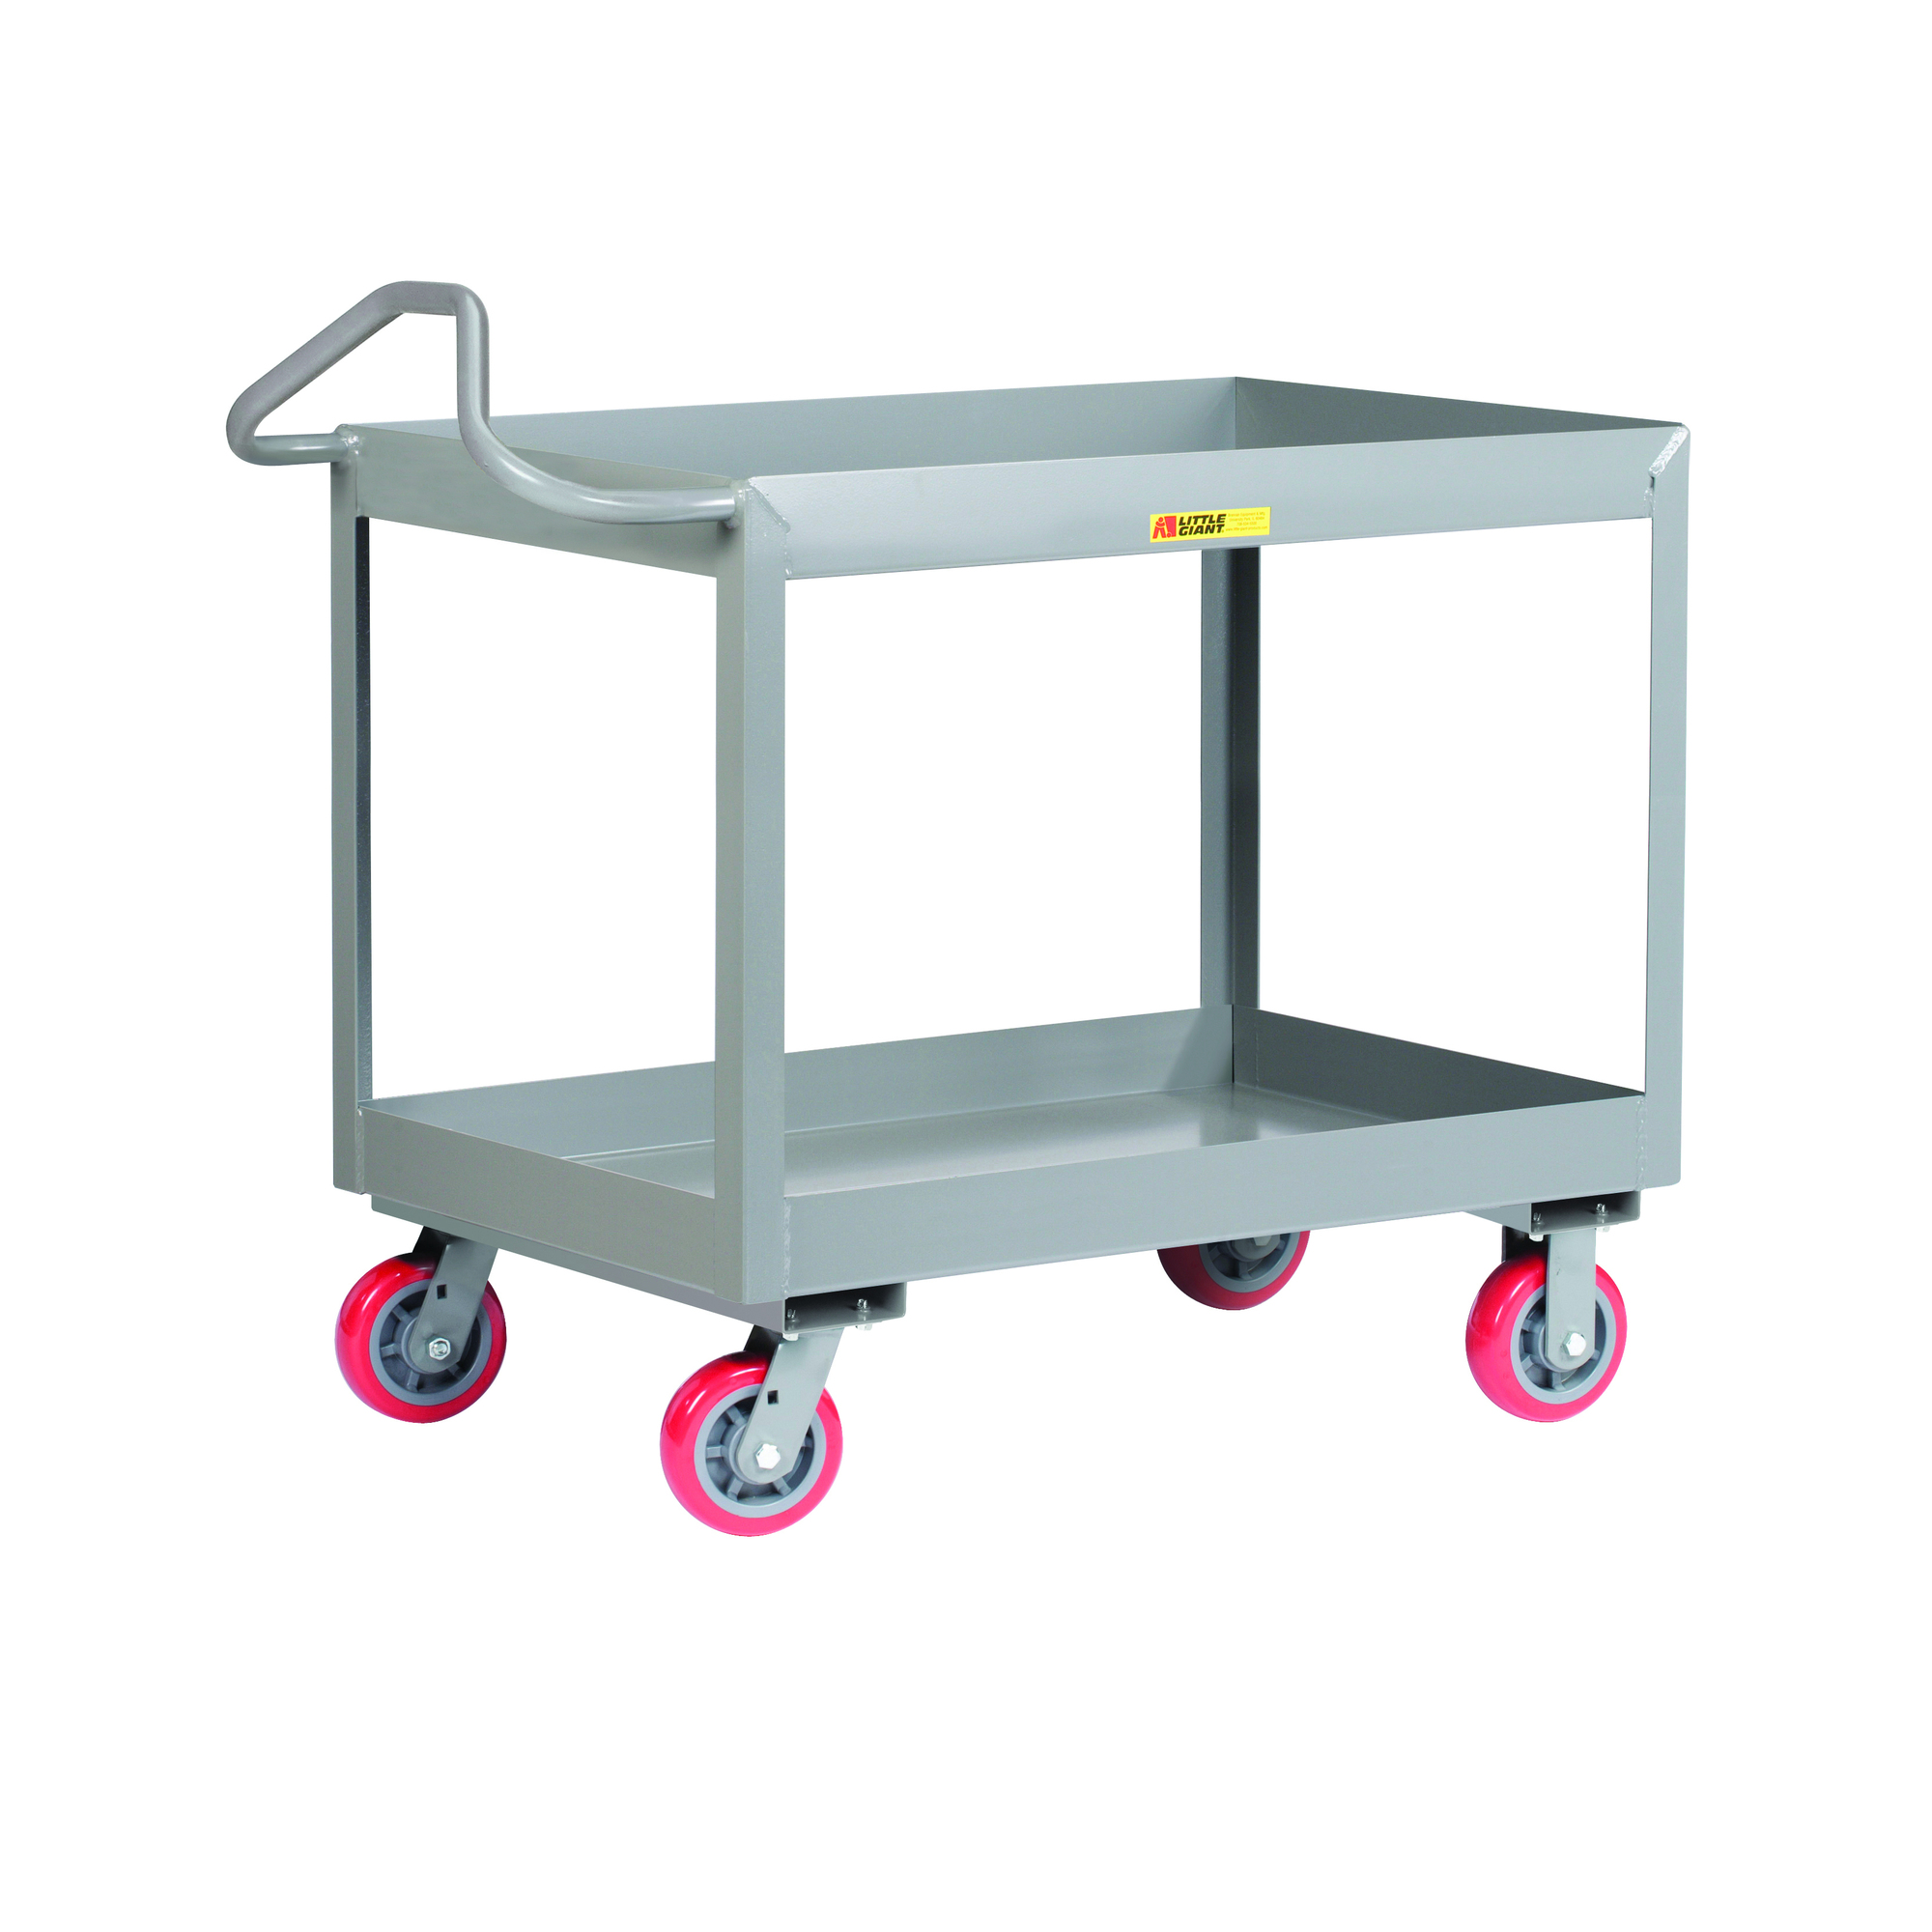 Little Giant, 3Inch Deep Shelf Truck, Ergo Handle, 24x36, 3600 lbs, Total Capacity 3600 lb, Shelves (qty.) 2, Material Carbon Steel, Model ENDS-2436X3